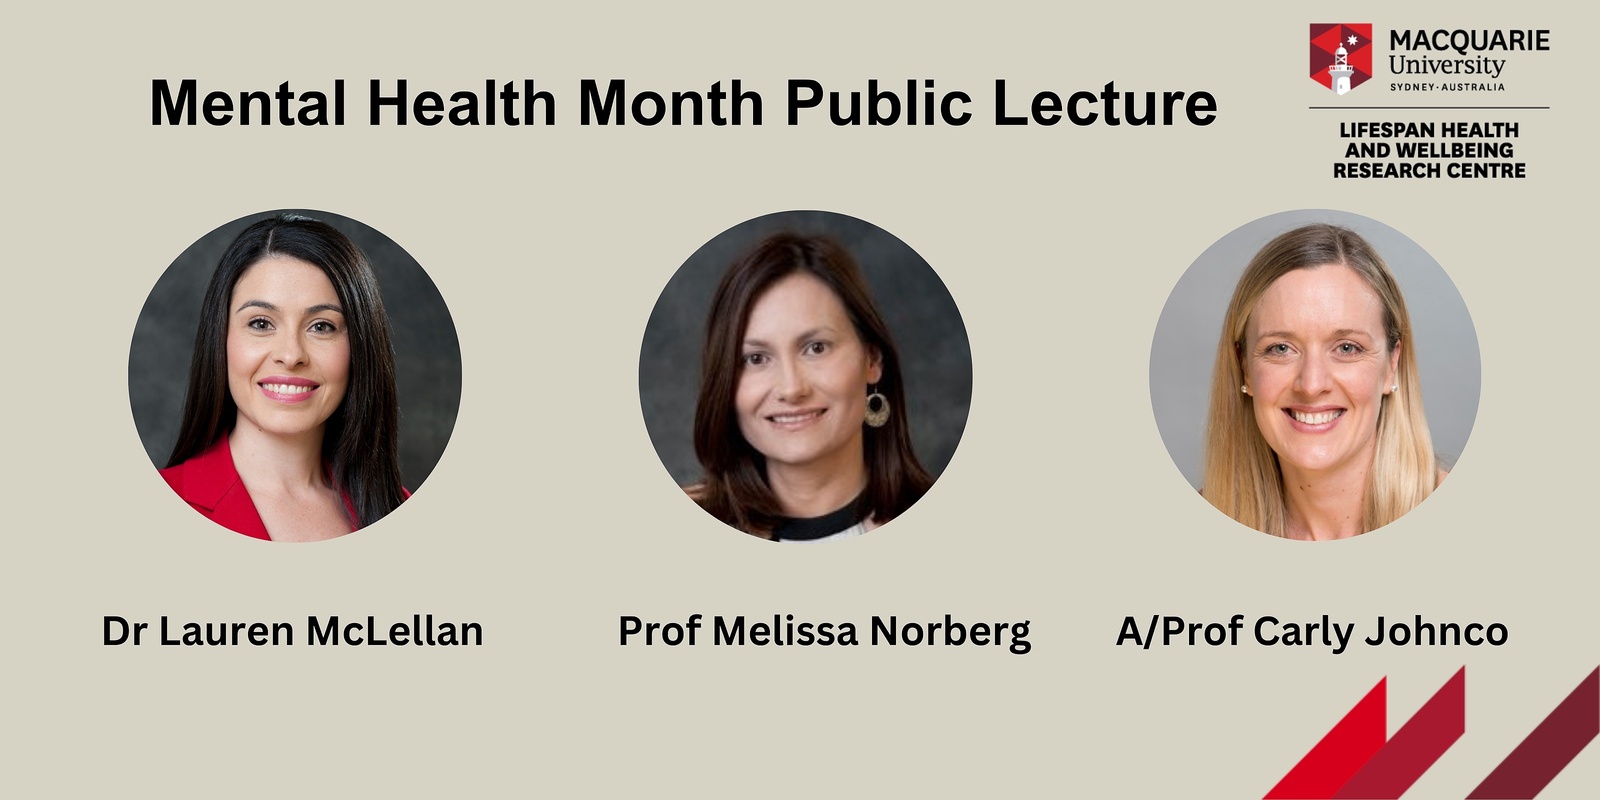 Banner image for Macquarie University Lifespan Research Centre Mental Health Month Public Lecture